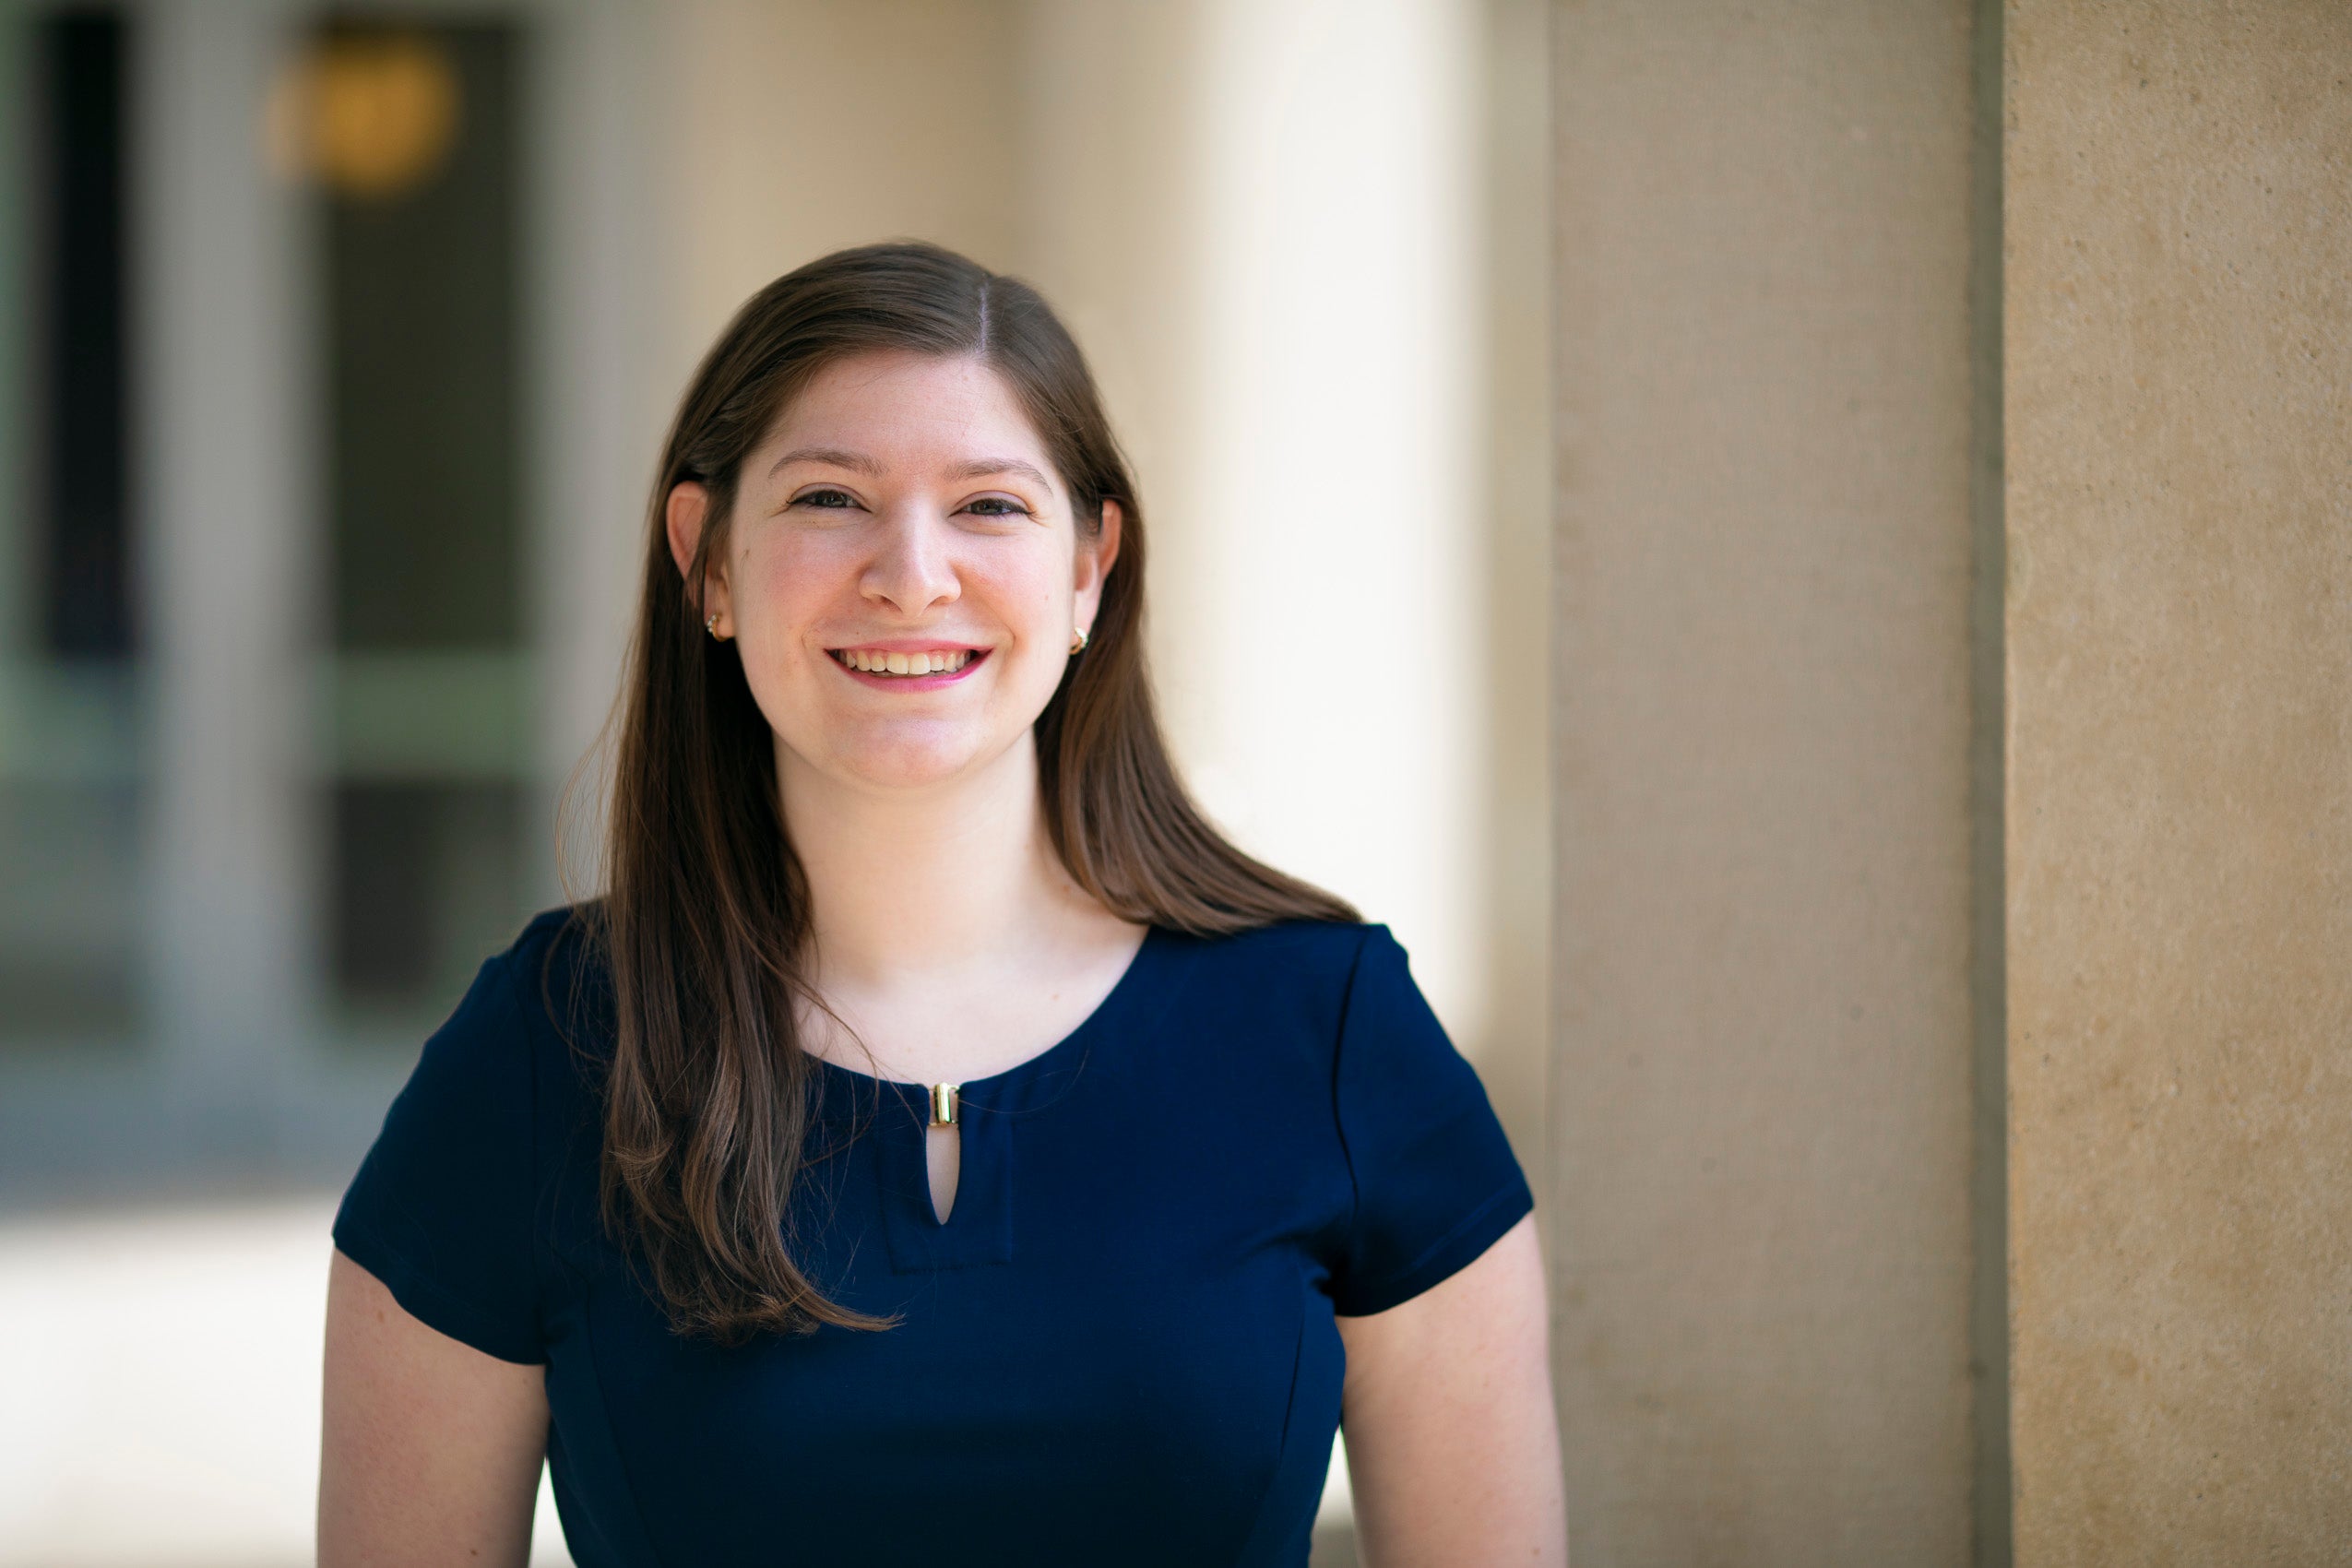 Heather Artinian ’18: ‘When people tell me no, that just becomes more of a motivator for me’